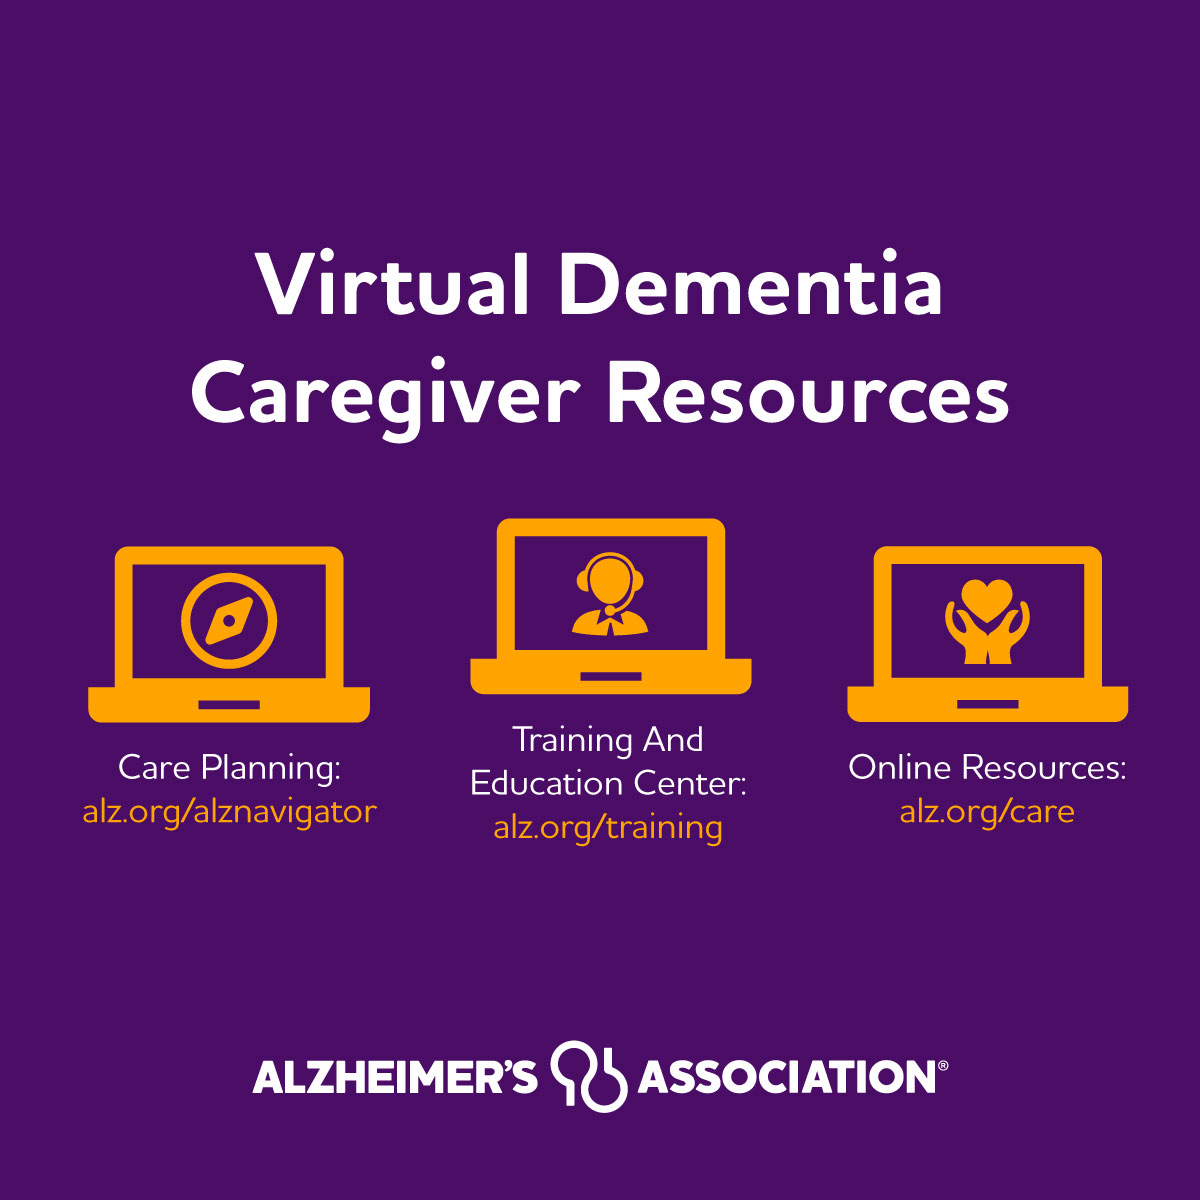 Our free, online caregiver trainings and workshops can help caregivers gain skills and practical advice. Access them now at bit.ly/2U04tWS. #NationalFamilyCaregiversMonth #ENDALZ